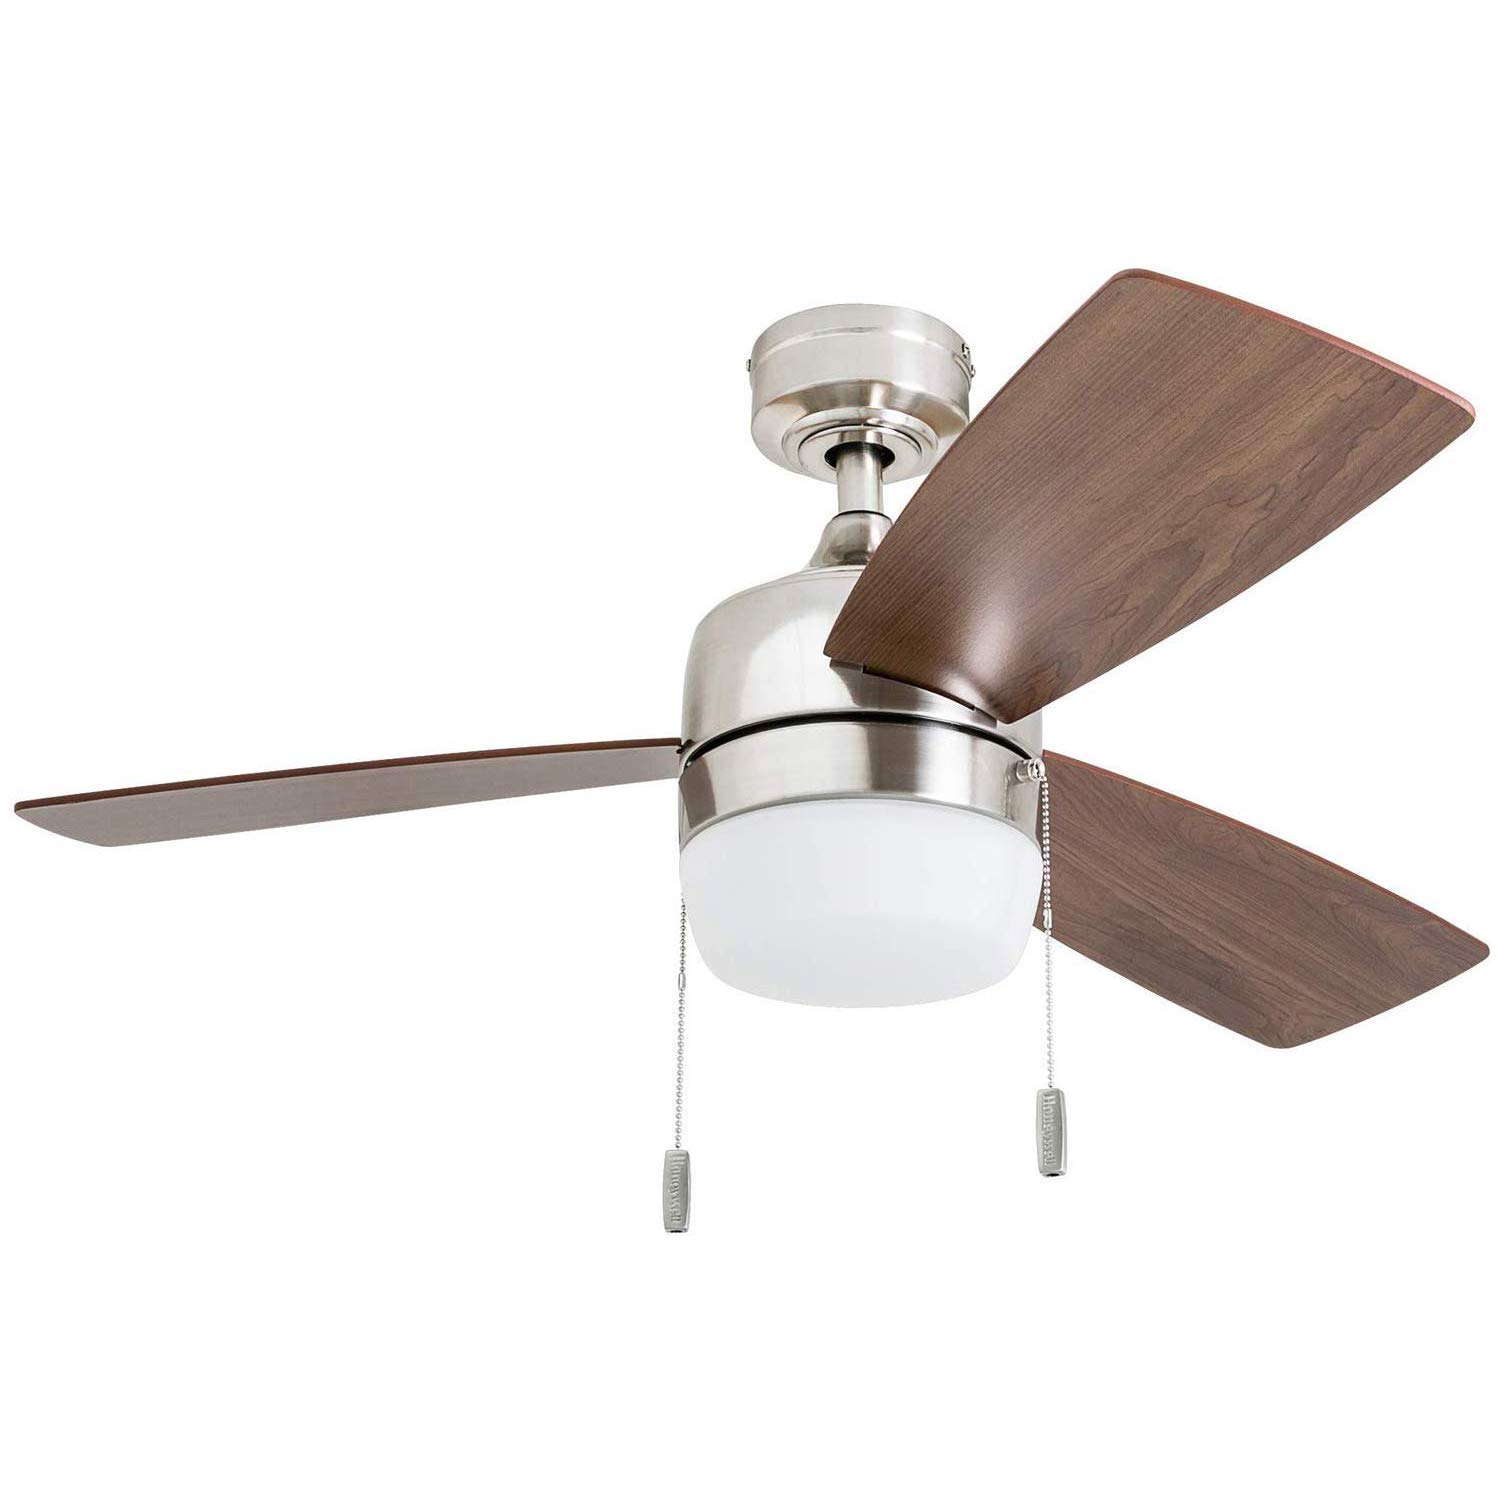 Honeywell Ceiling Fans Barcadero, 44 Inch Contemporary Indoor LED Ceiling Fan with Light, Pull Chain, Dual Mounting Options, Dual Finish Blades, Reversible Motor - 50616-01 (Brushed Nickel)